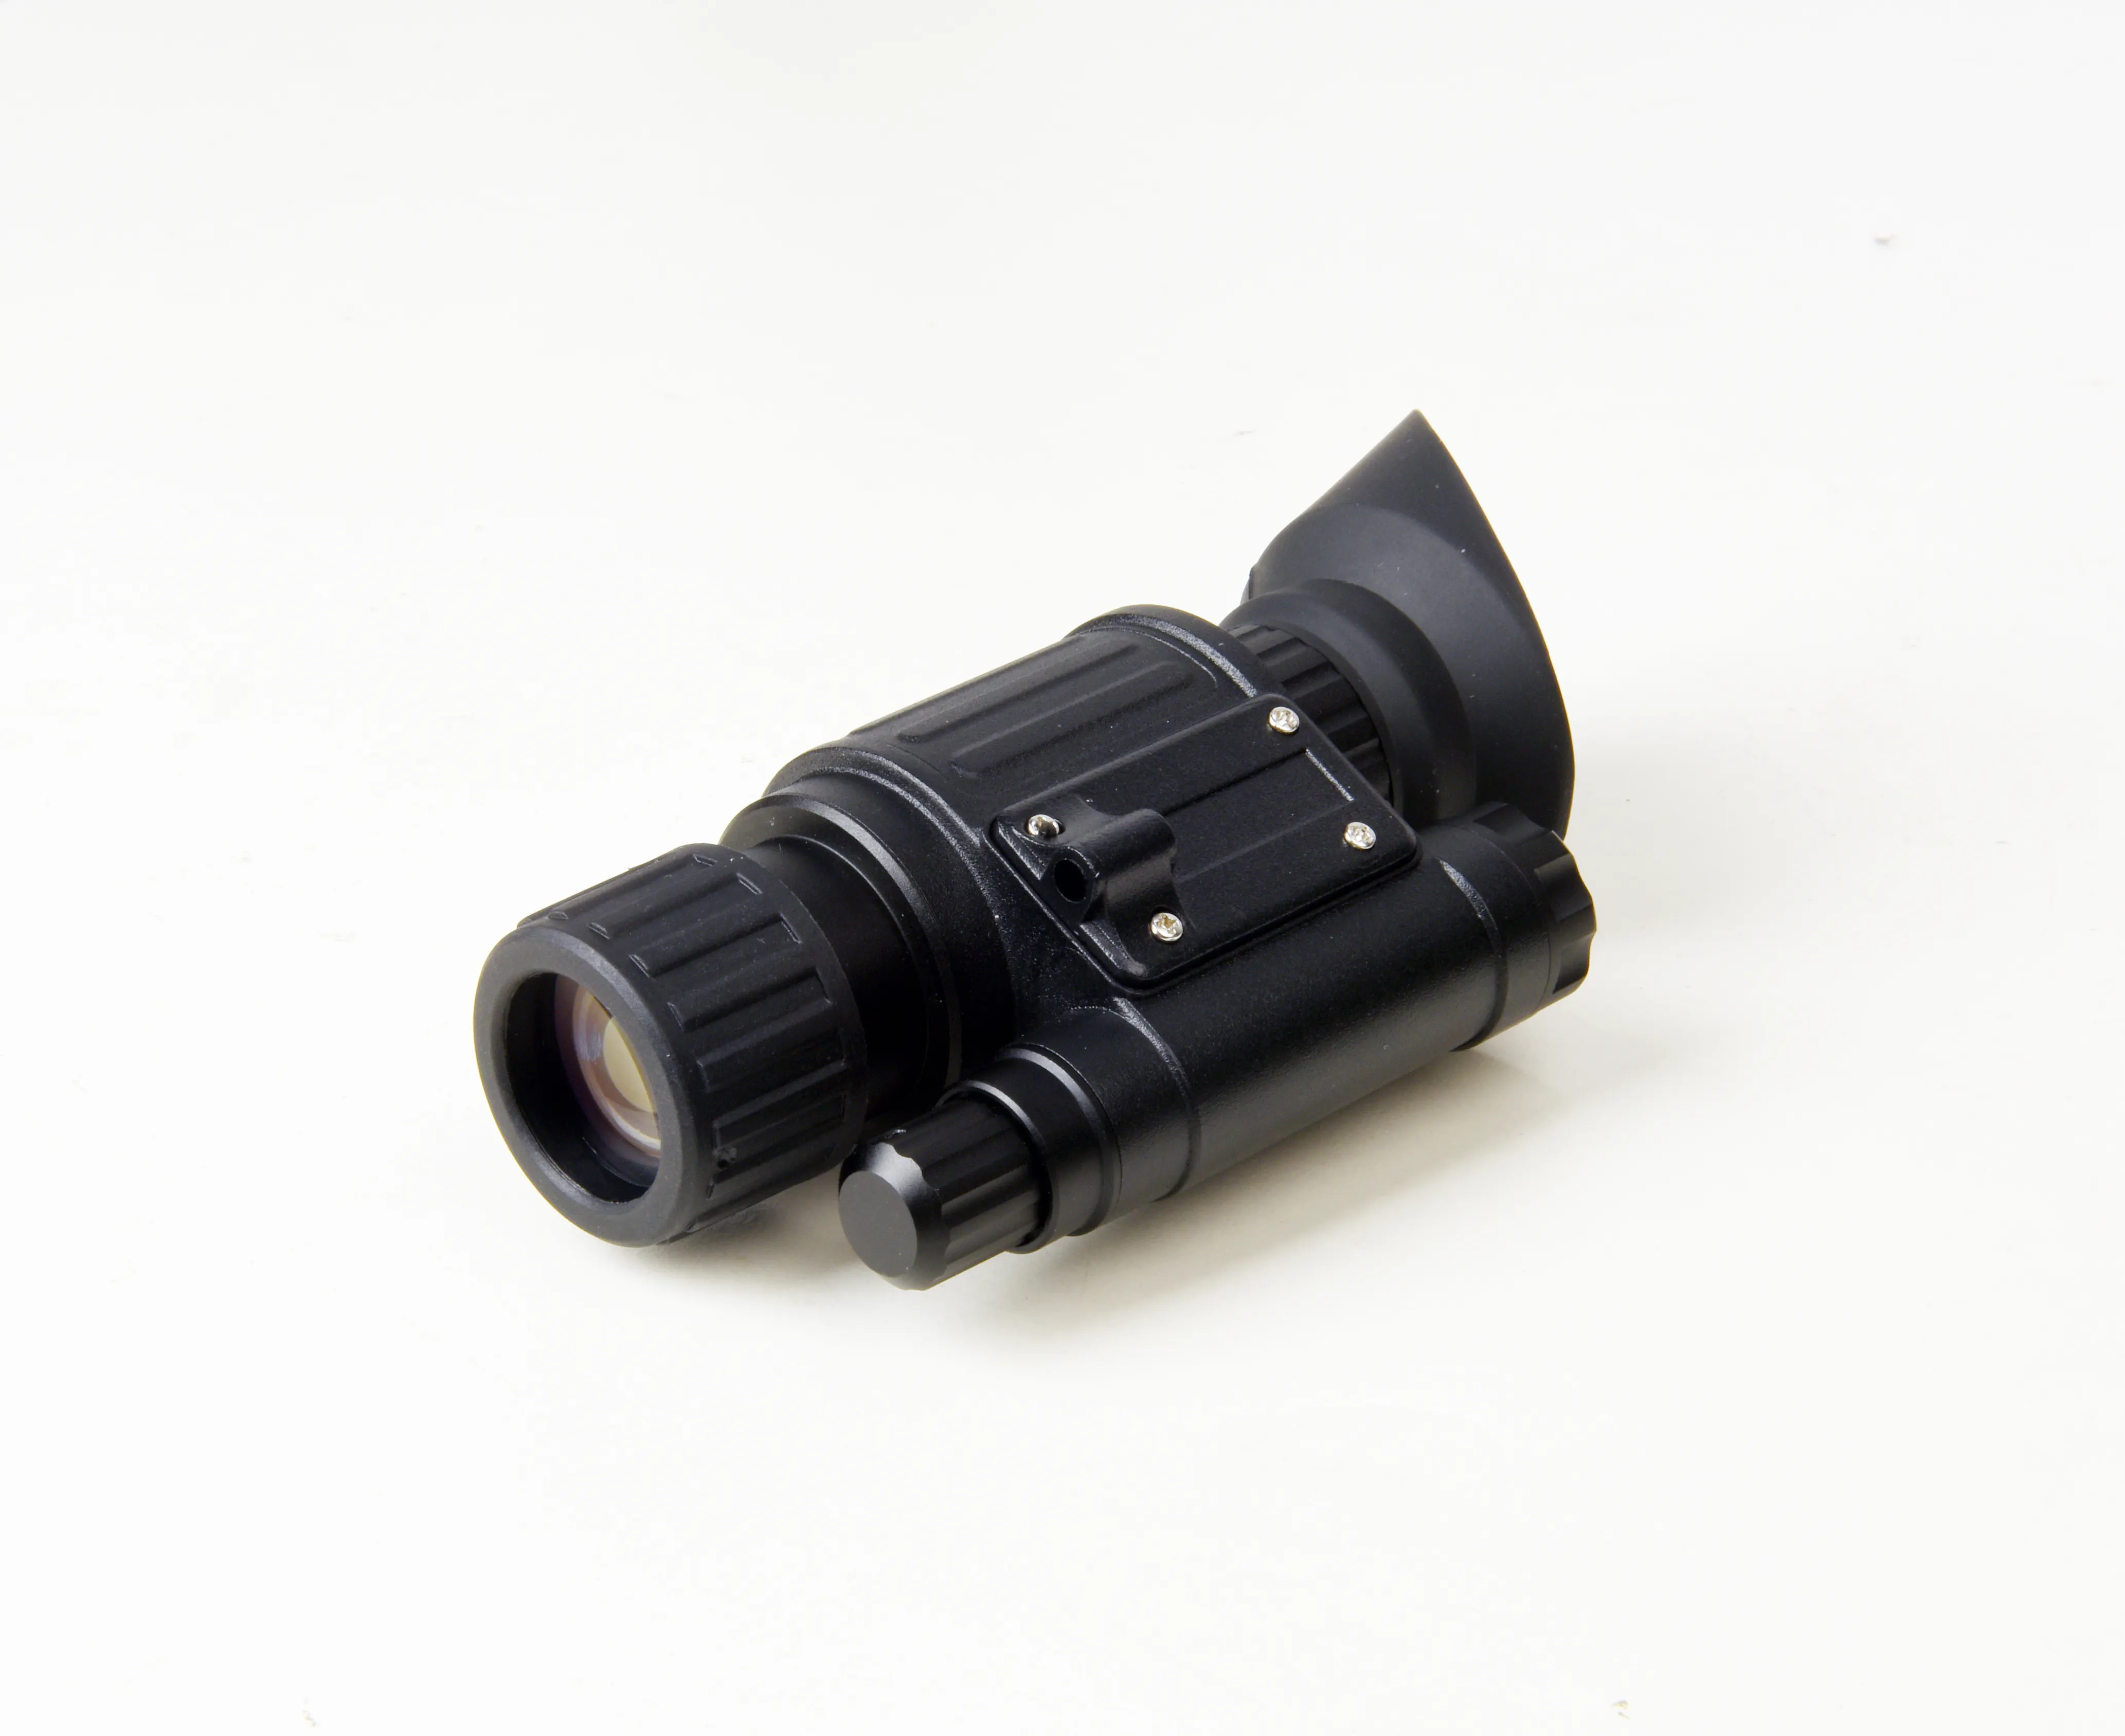 Roevision MHB-L Gen3 Monocular Night Vision Scope / Buy Mightysight Optical Night Sight Hunting Scope